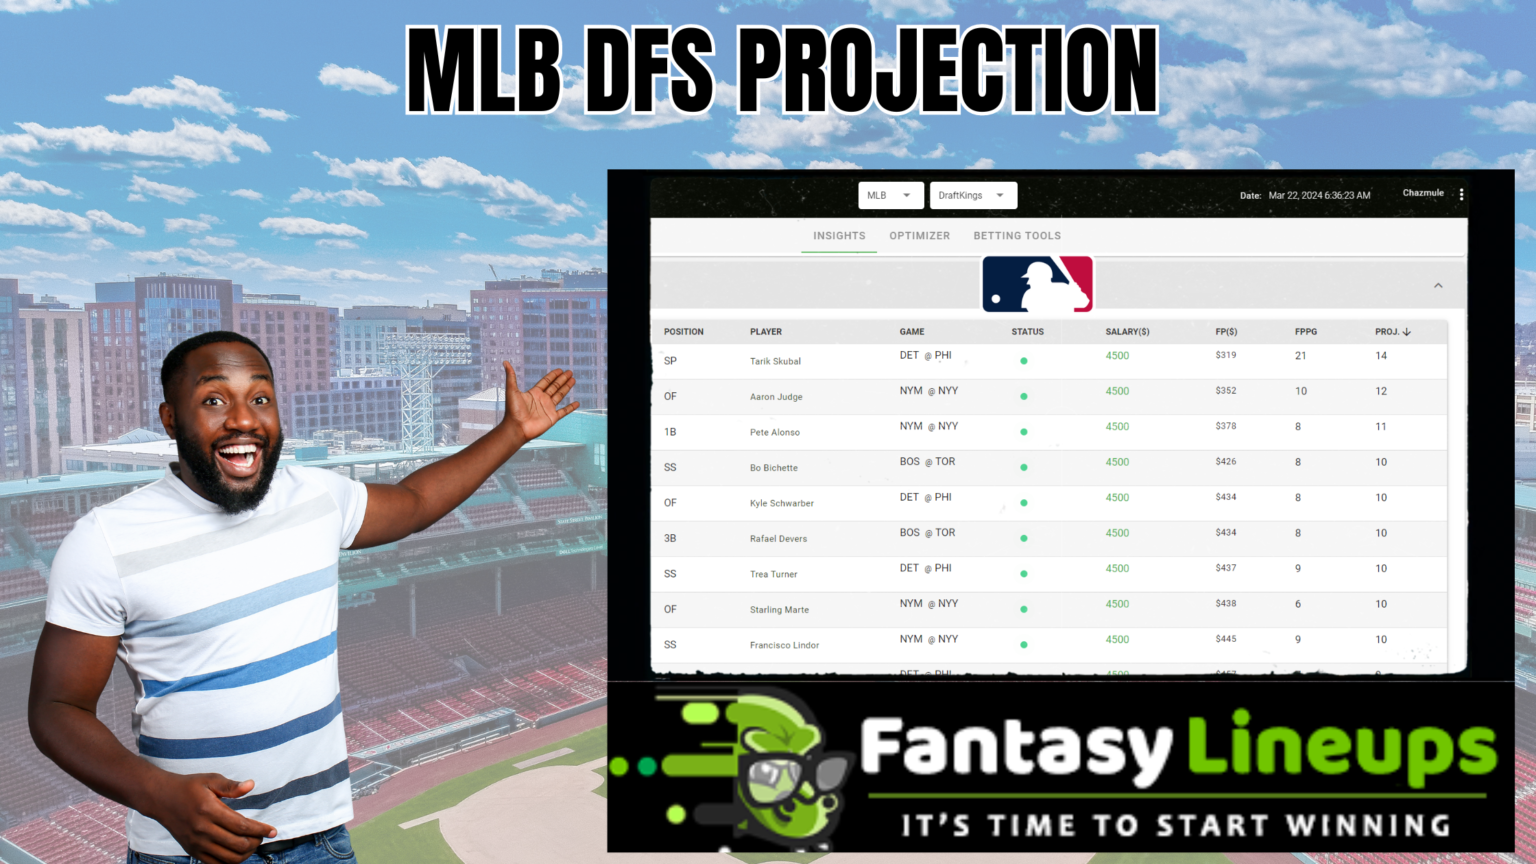 A detailed chart showcasing MLB DFS projections with key player statistics